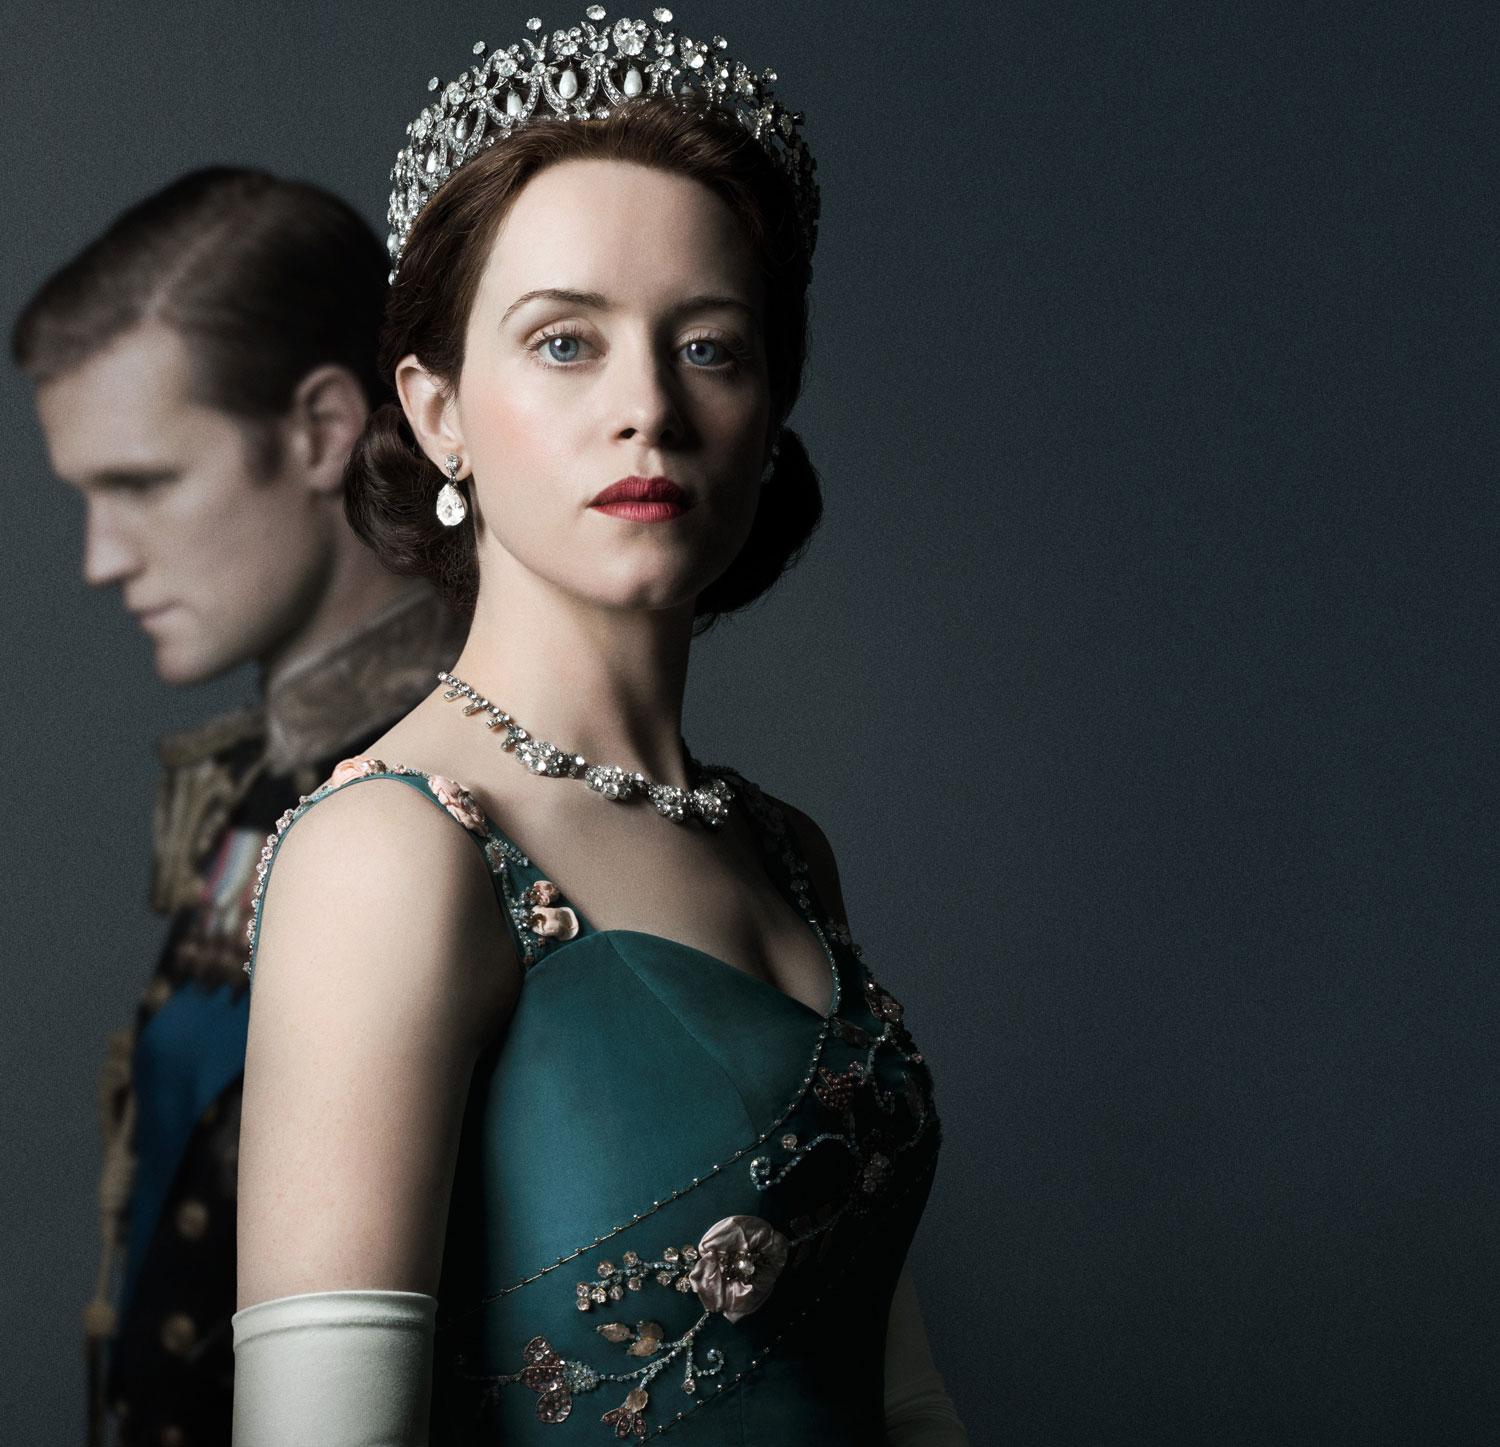 ”The crown”.